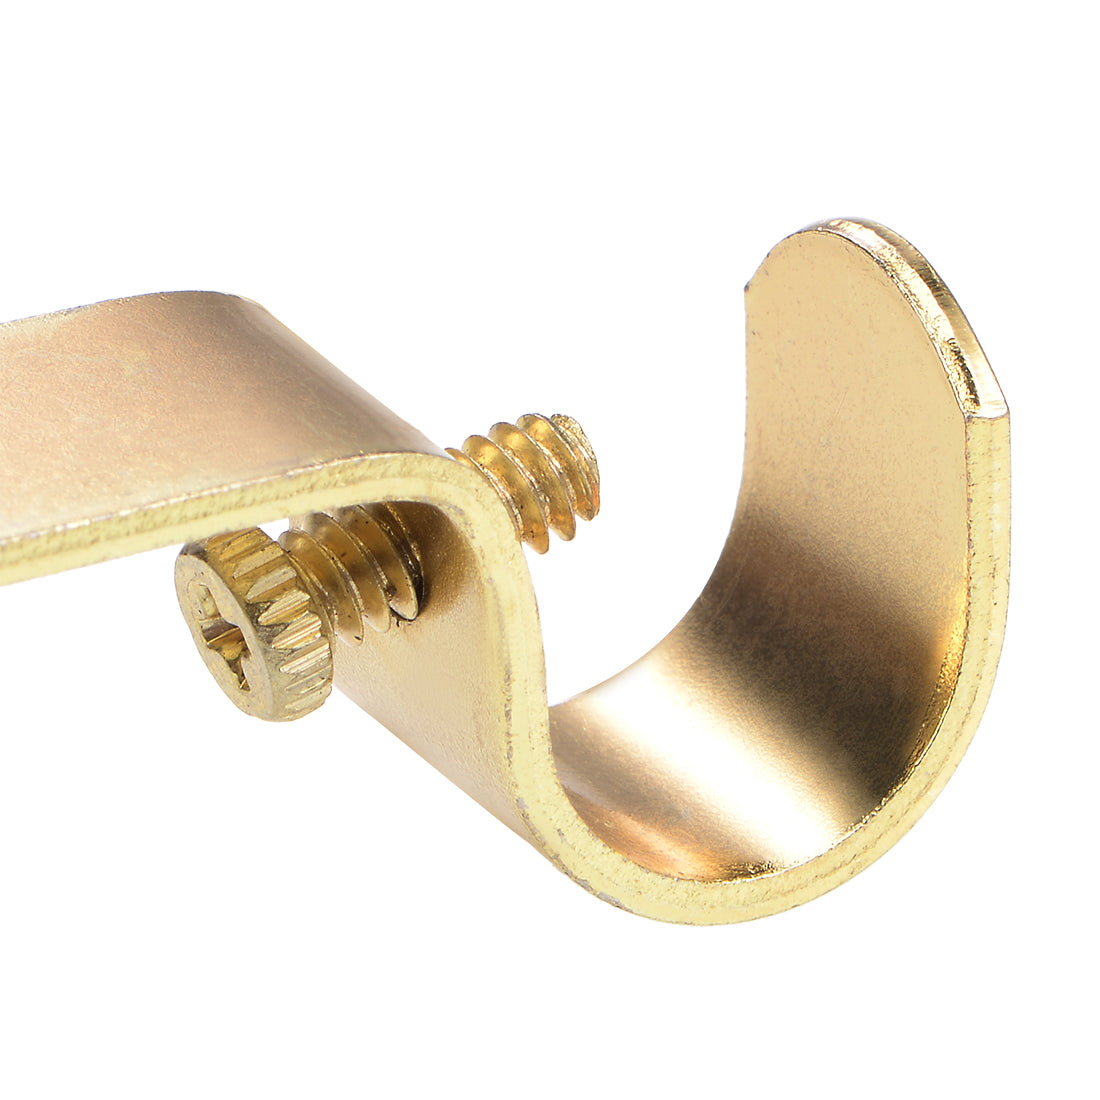 uxcell Uxcell Curtain Rod Bracket Iron Single Holder Support for 16mm Drapery Rod, 73 x 36 x 16mm Gold Tone 2Pcs